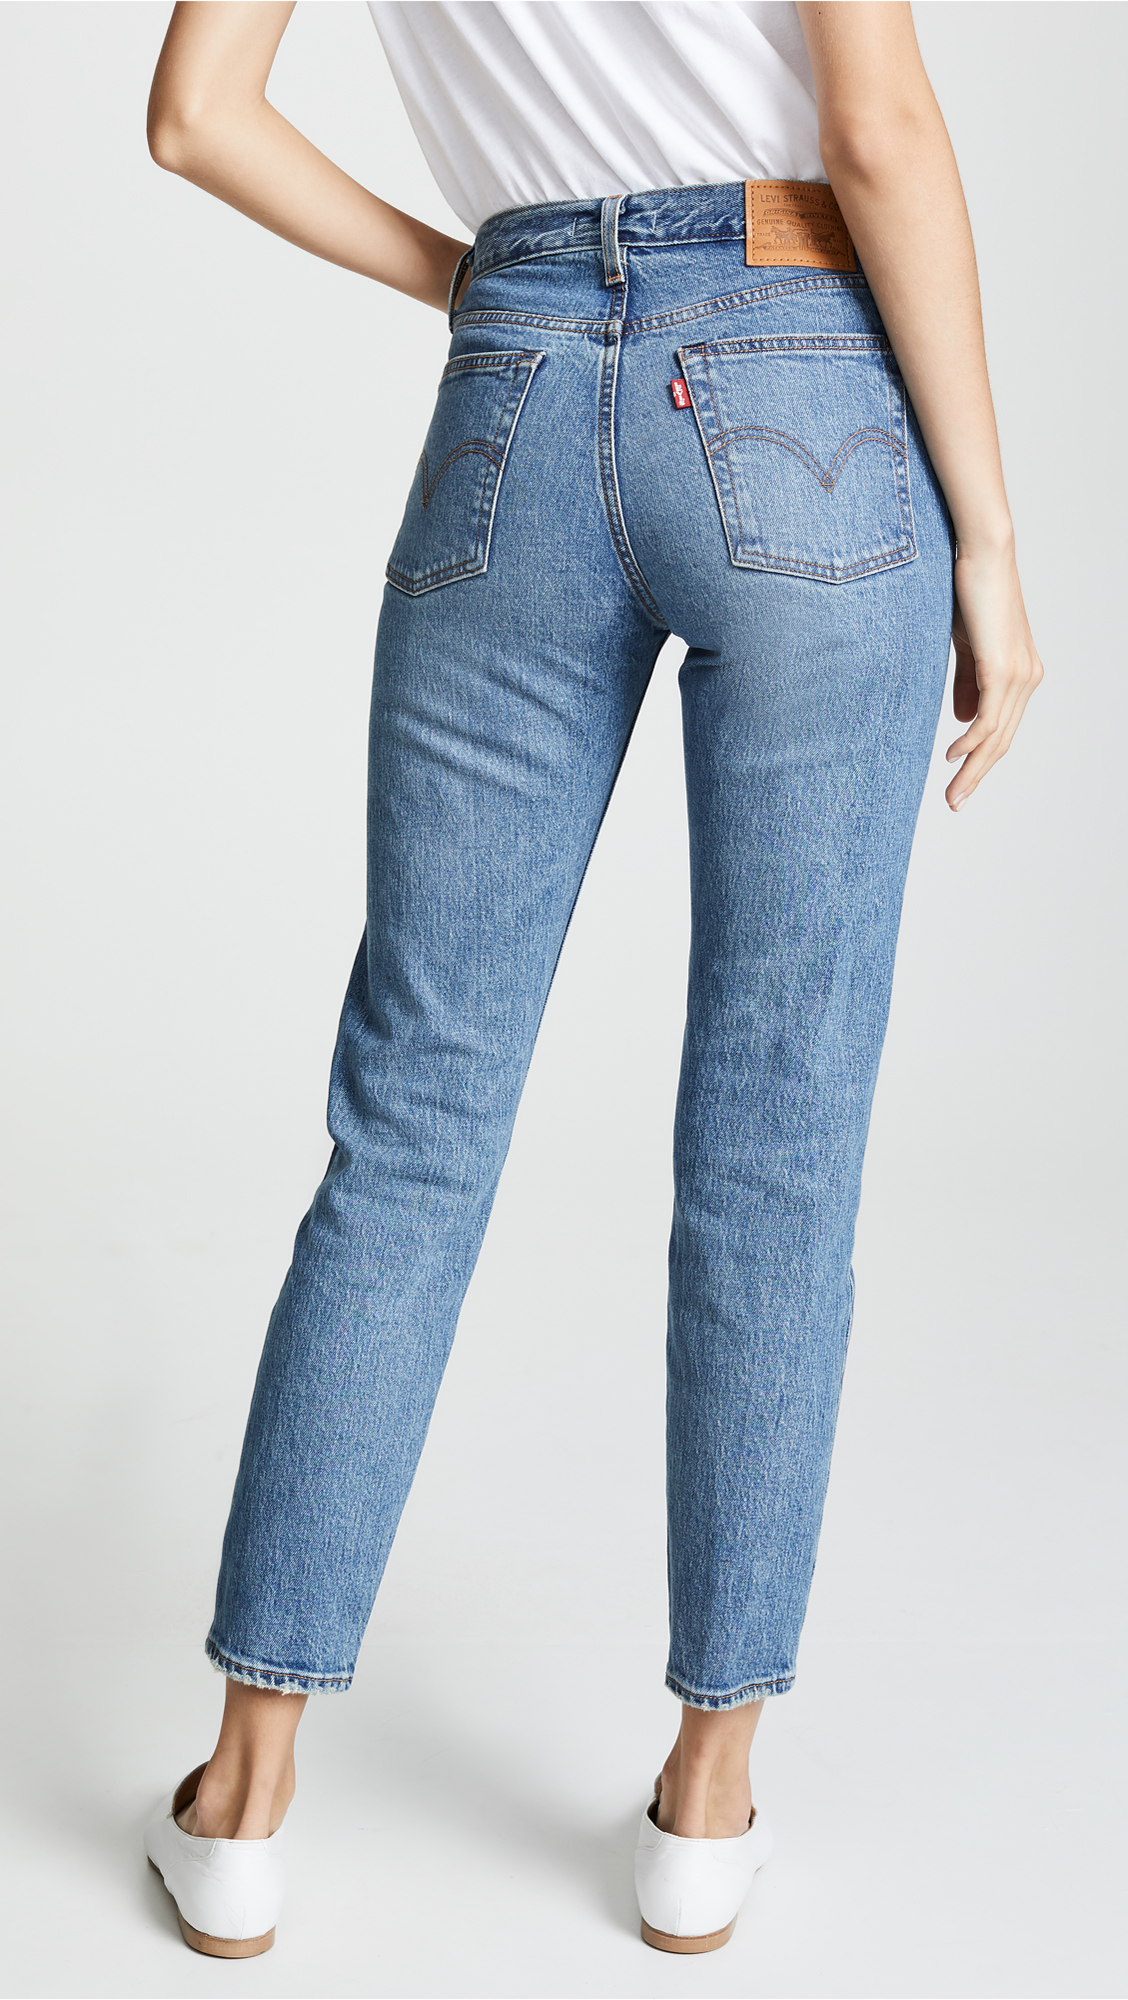 These 20 Sculpting Jeans Will Make Your 